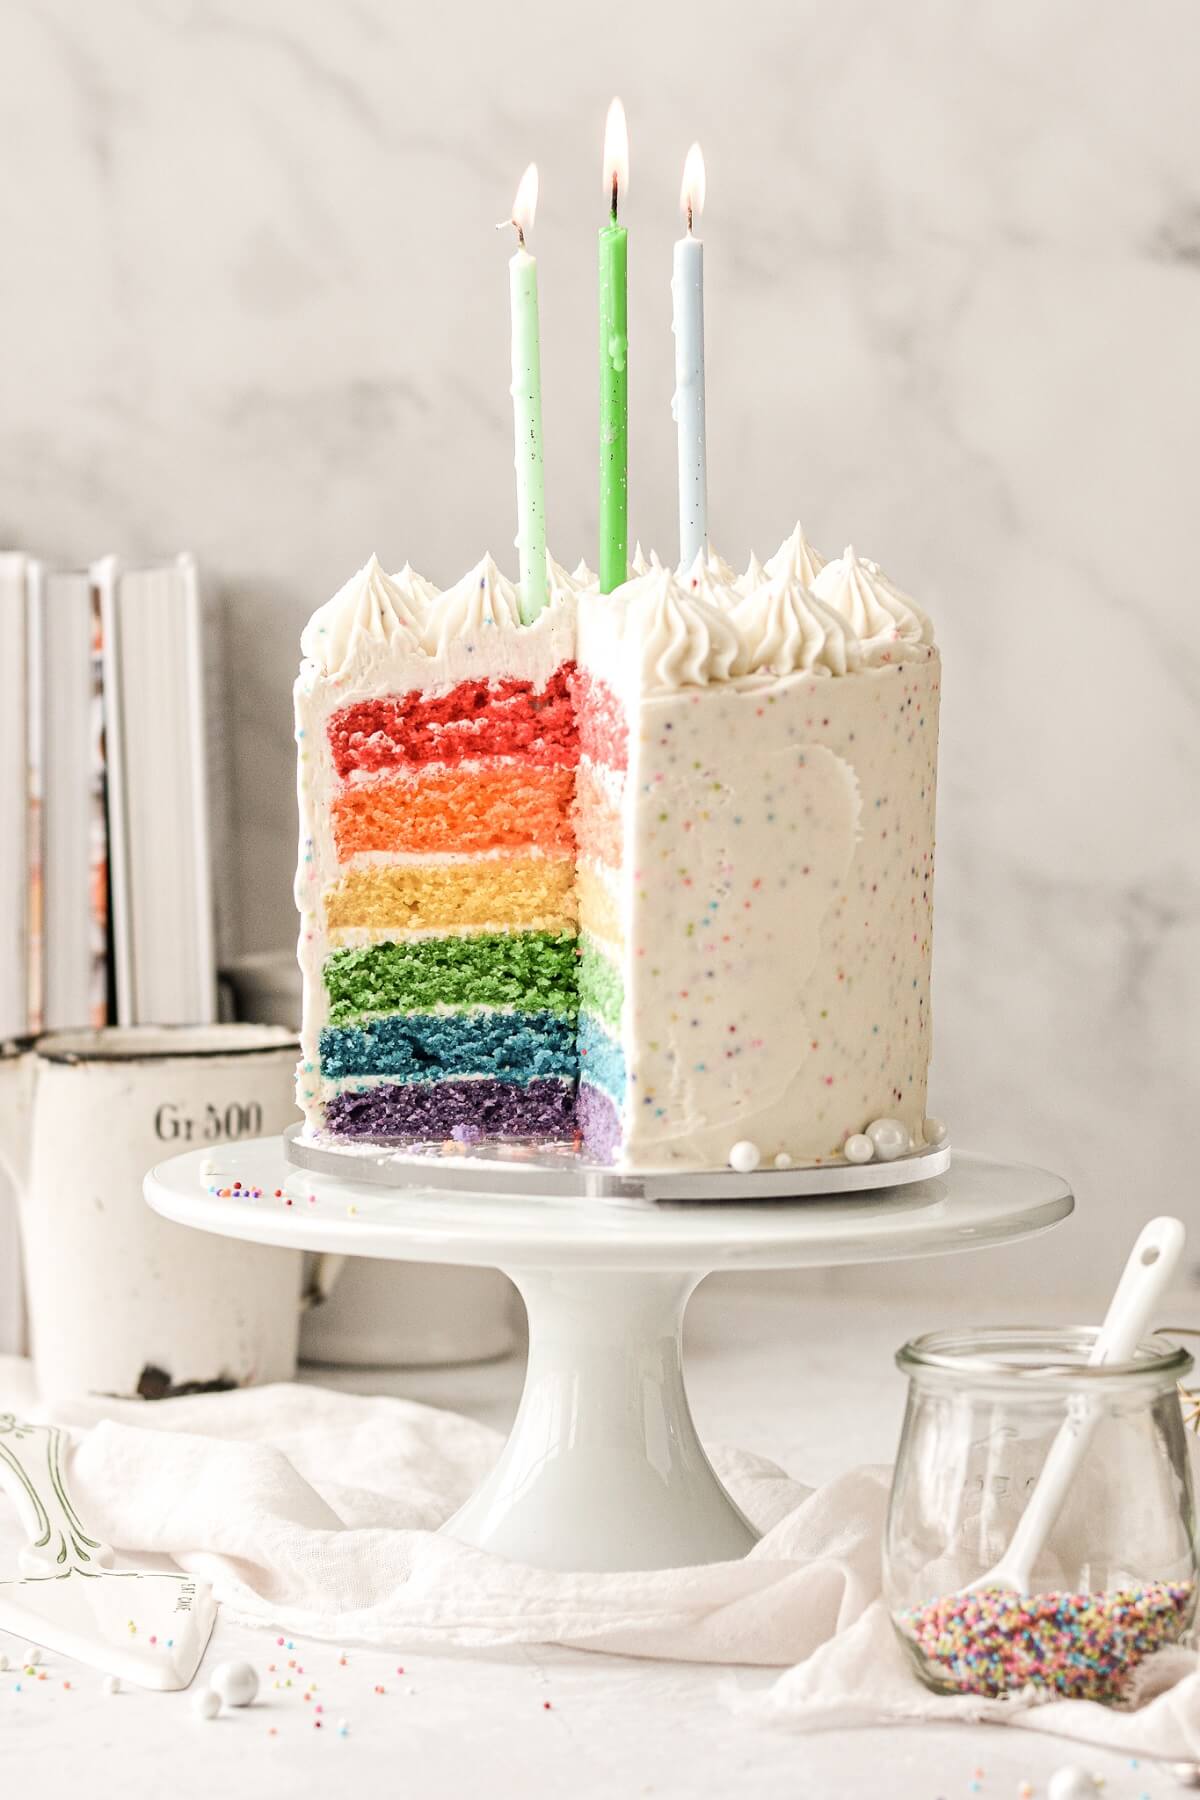 Rainbow birthday cake with sprinkles and candles.